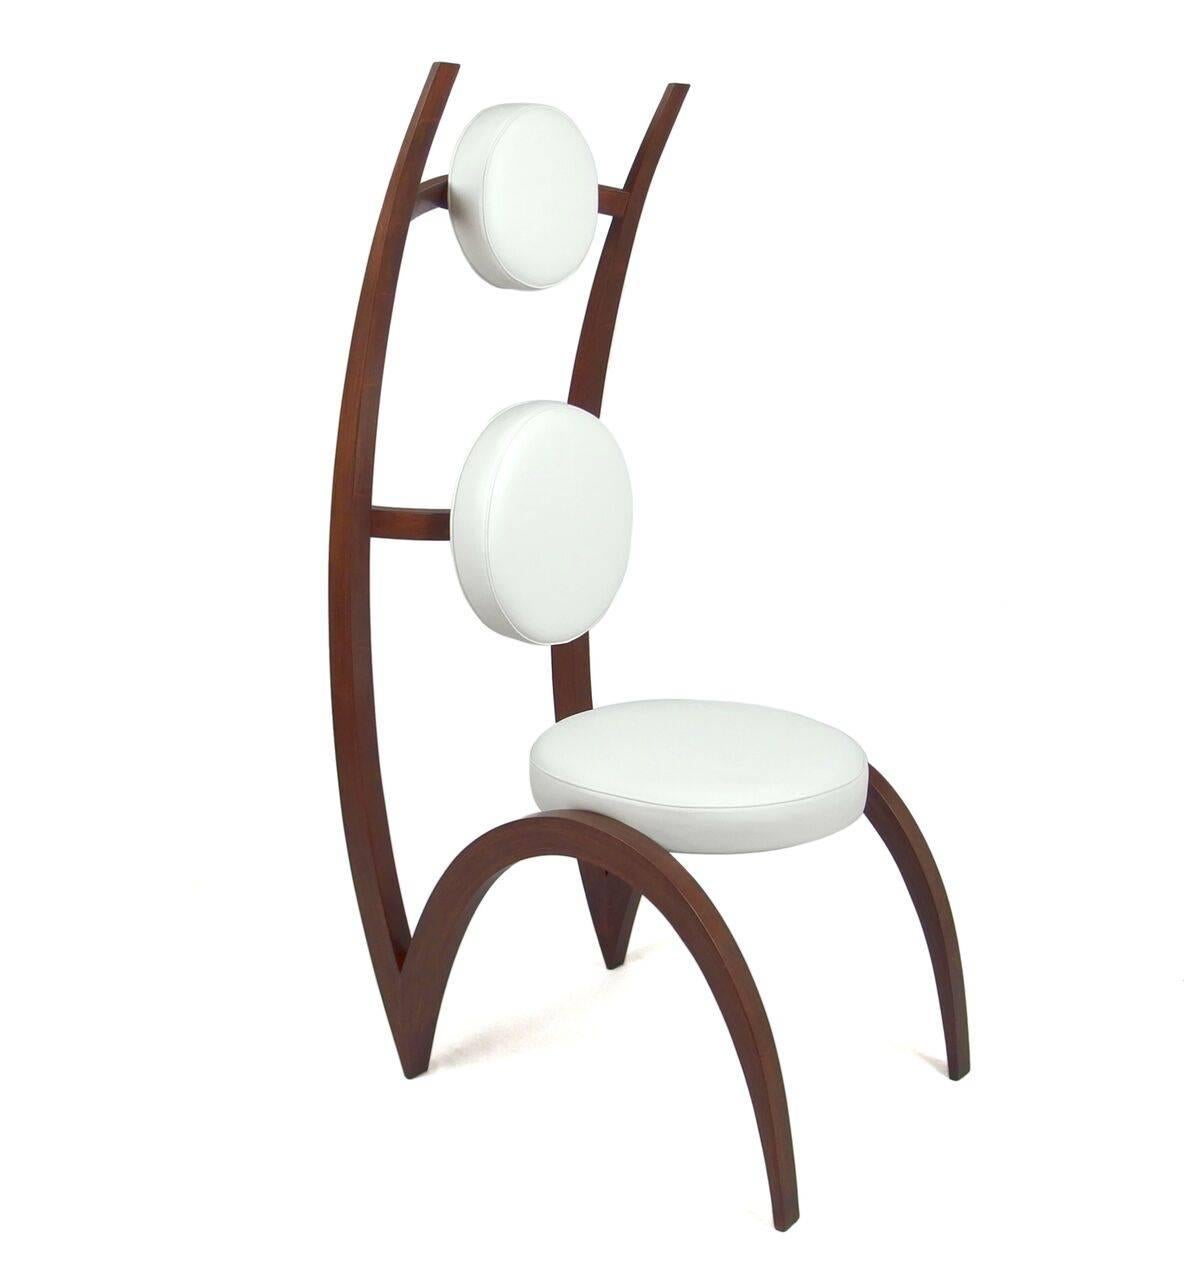 Organic Modern Arched Chair Editioned by Massimo Farina